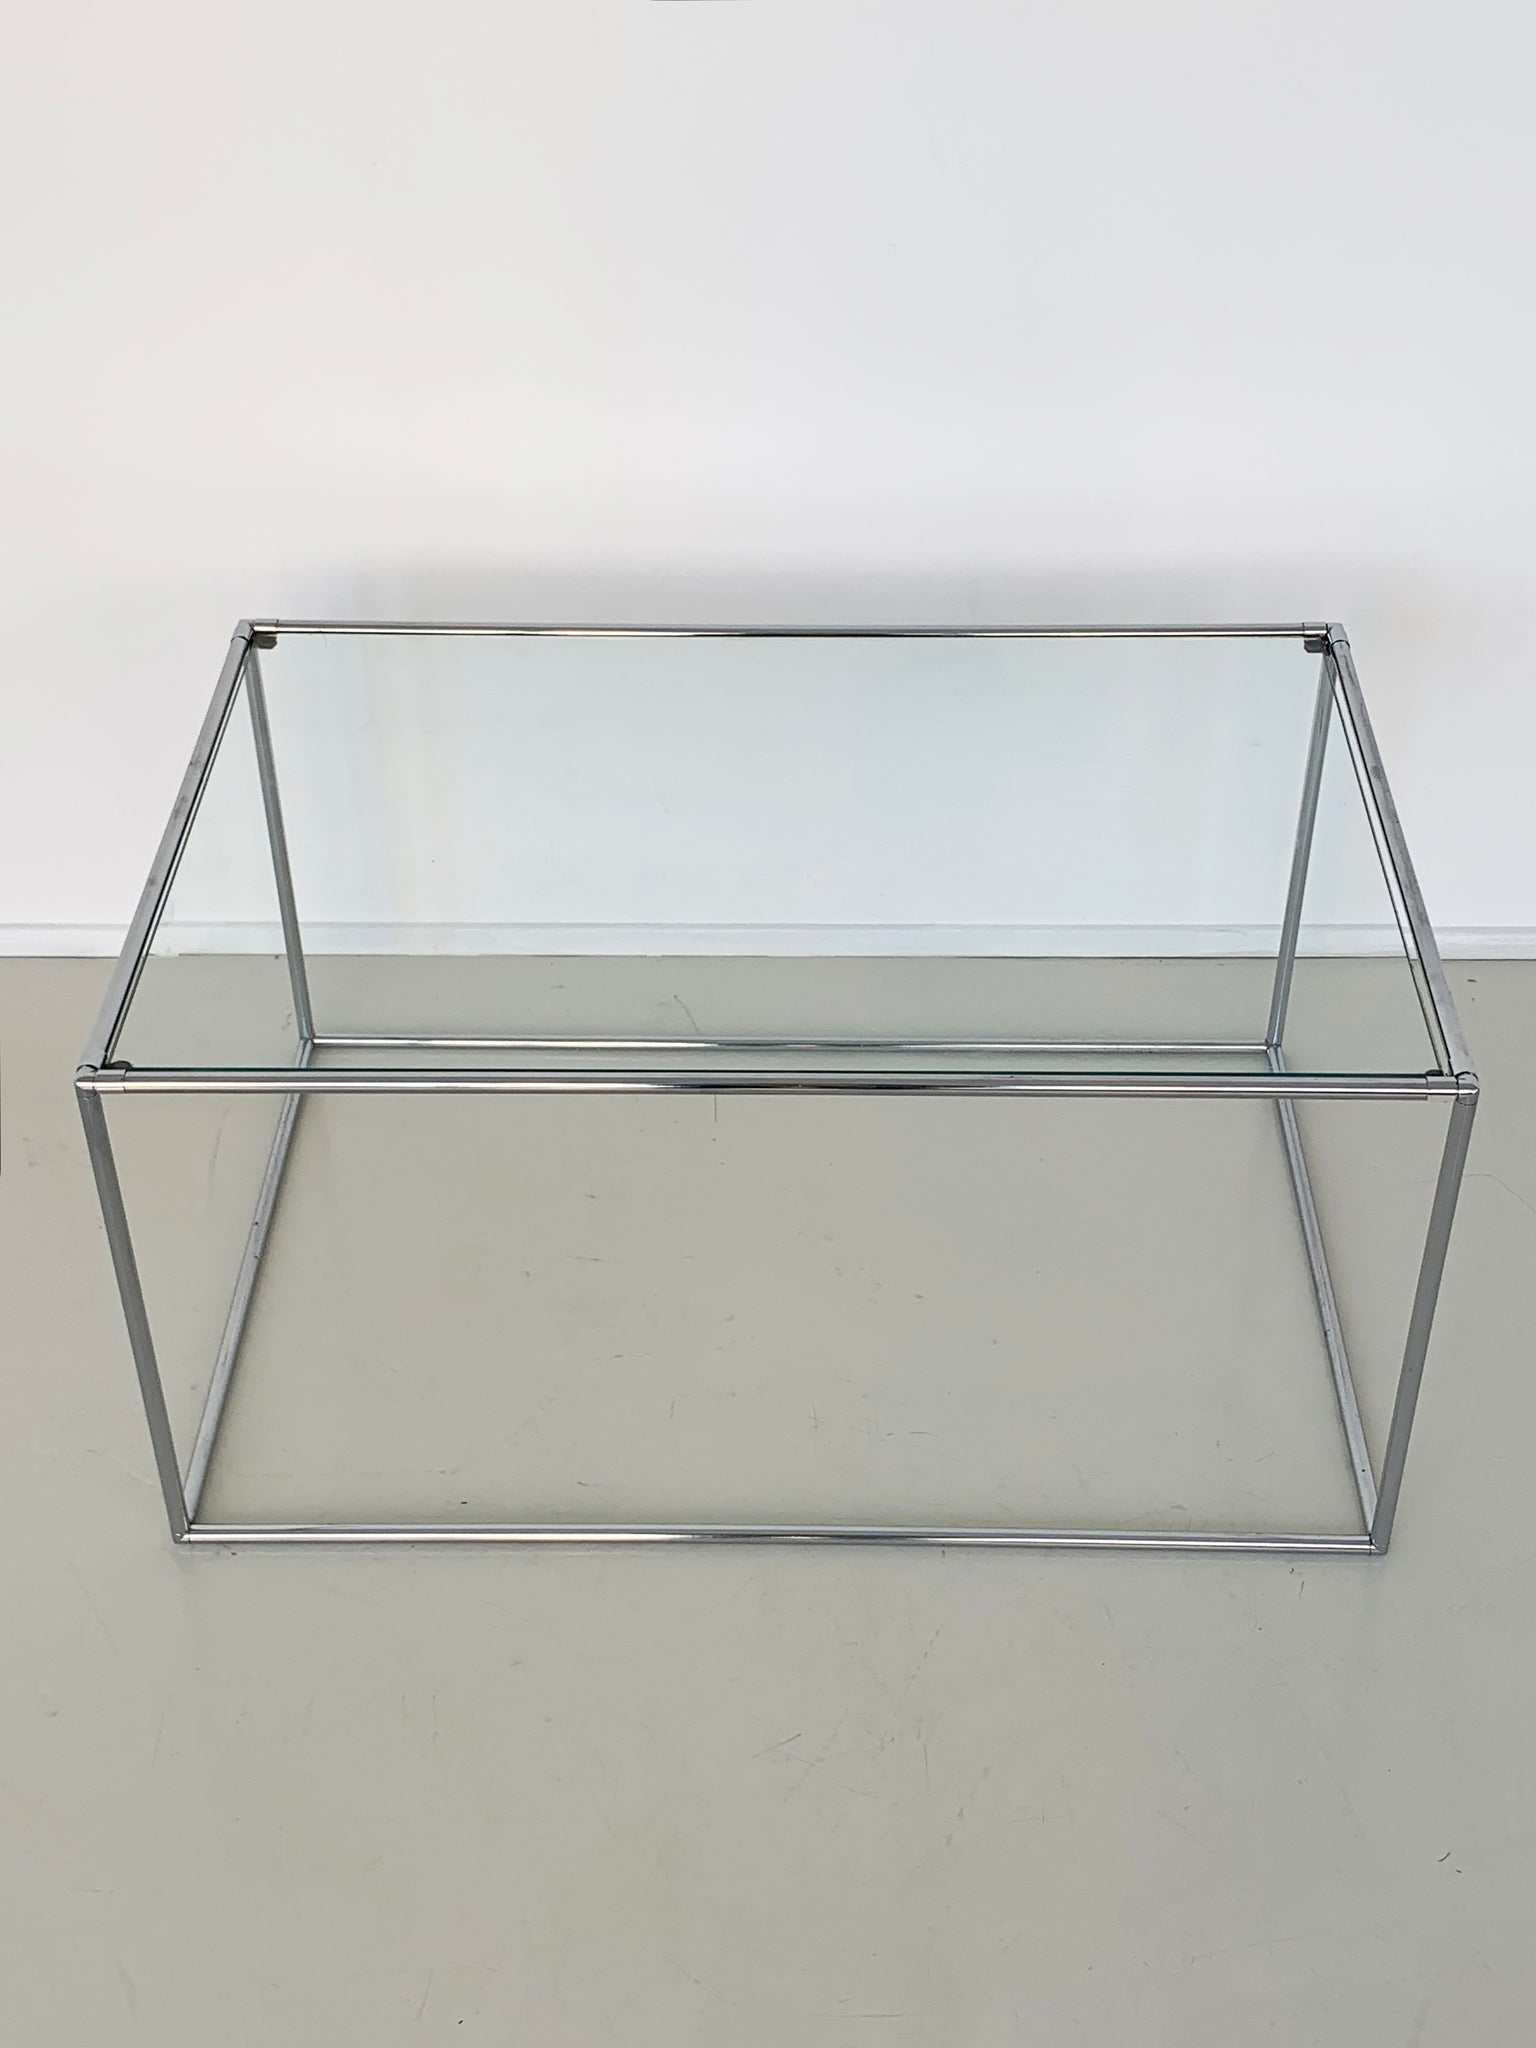 Mid Century "Abstracta" Chrome and Glass Coffee Table by Poul Cadovius